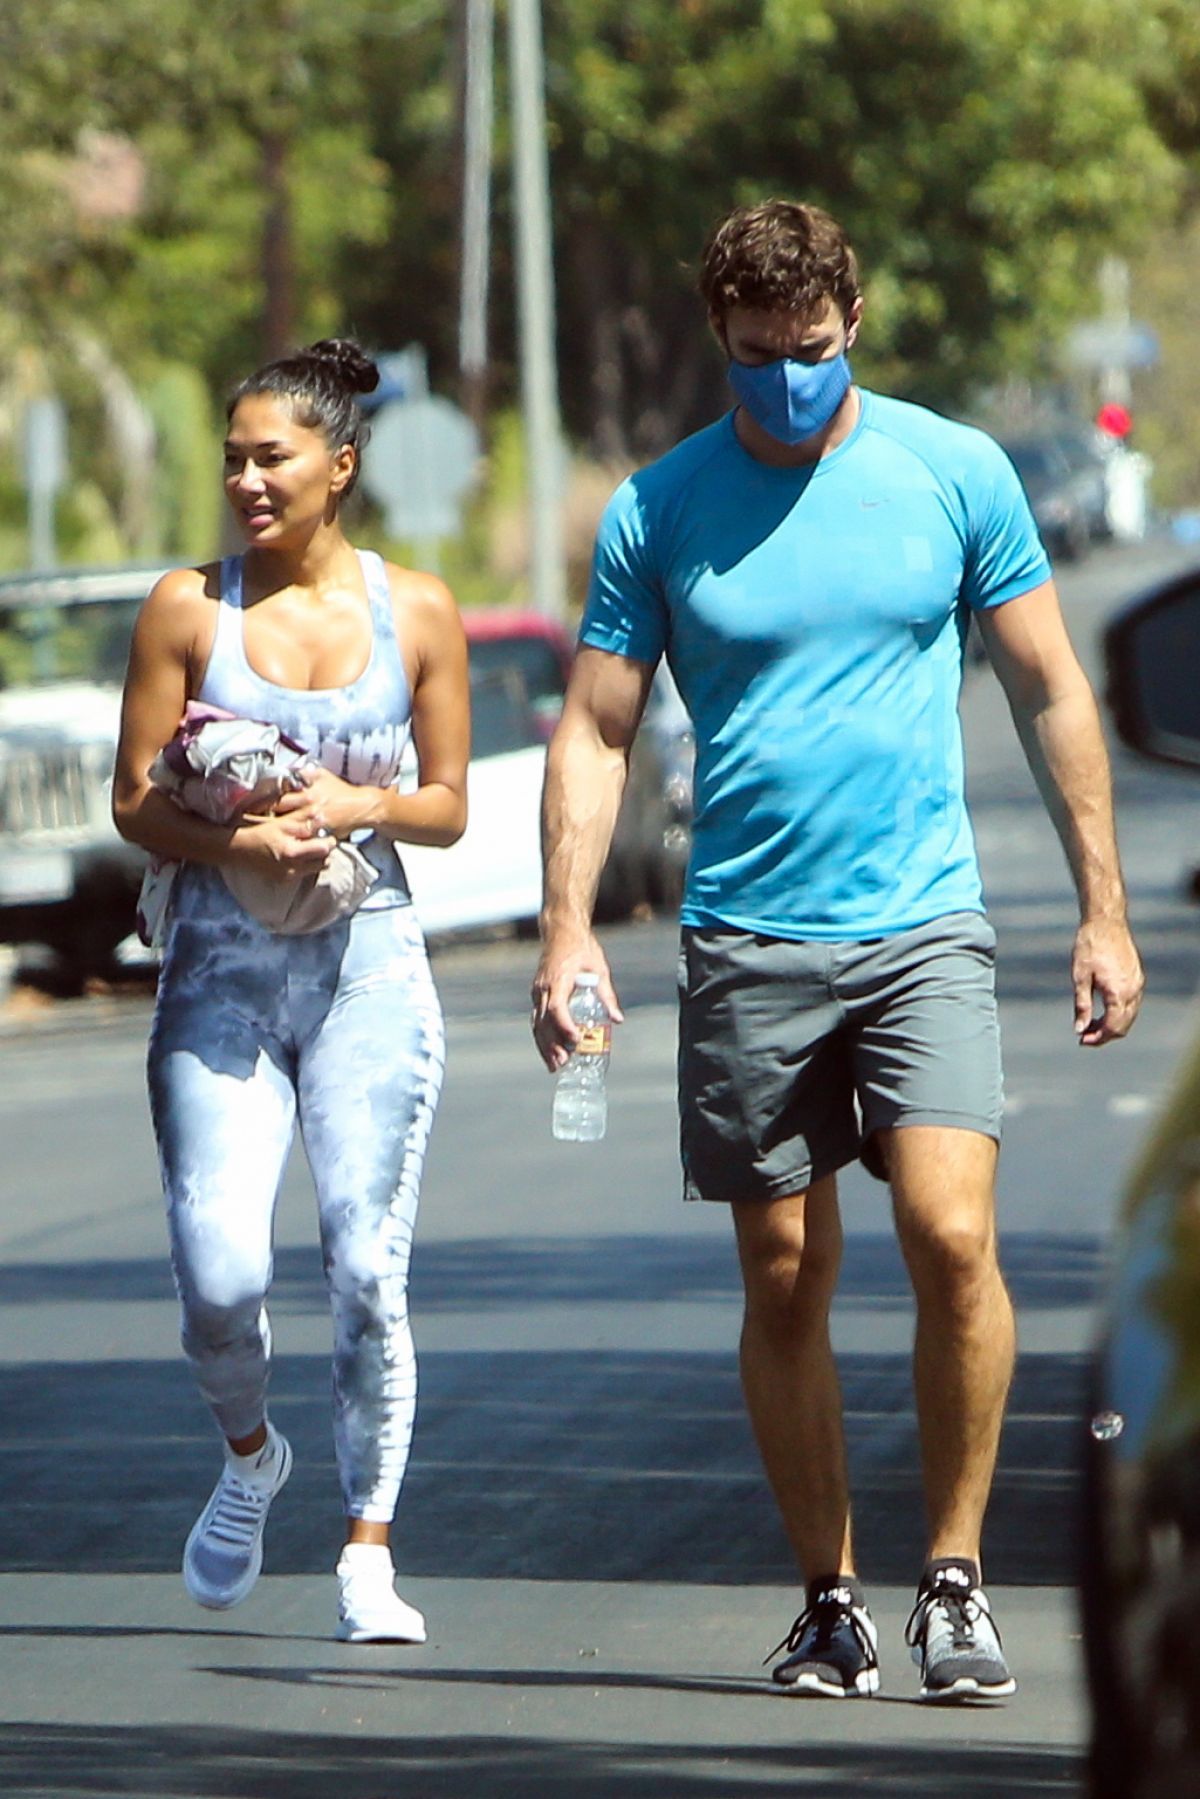 Nicole Scherzinger and Thom Evans Heading to a Gym in Los Angeles 2020/08/26